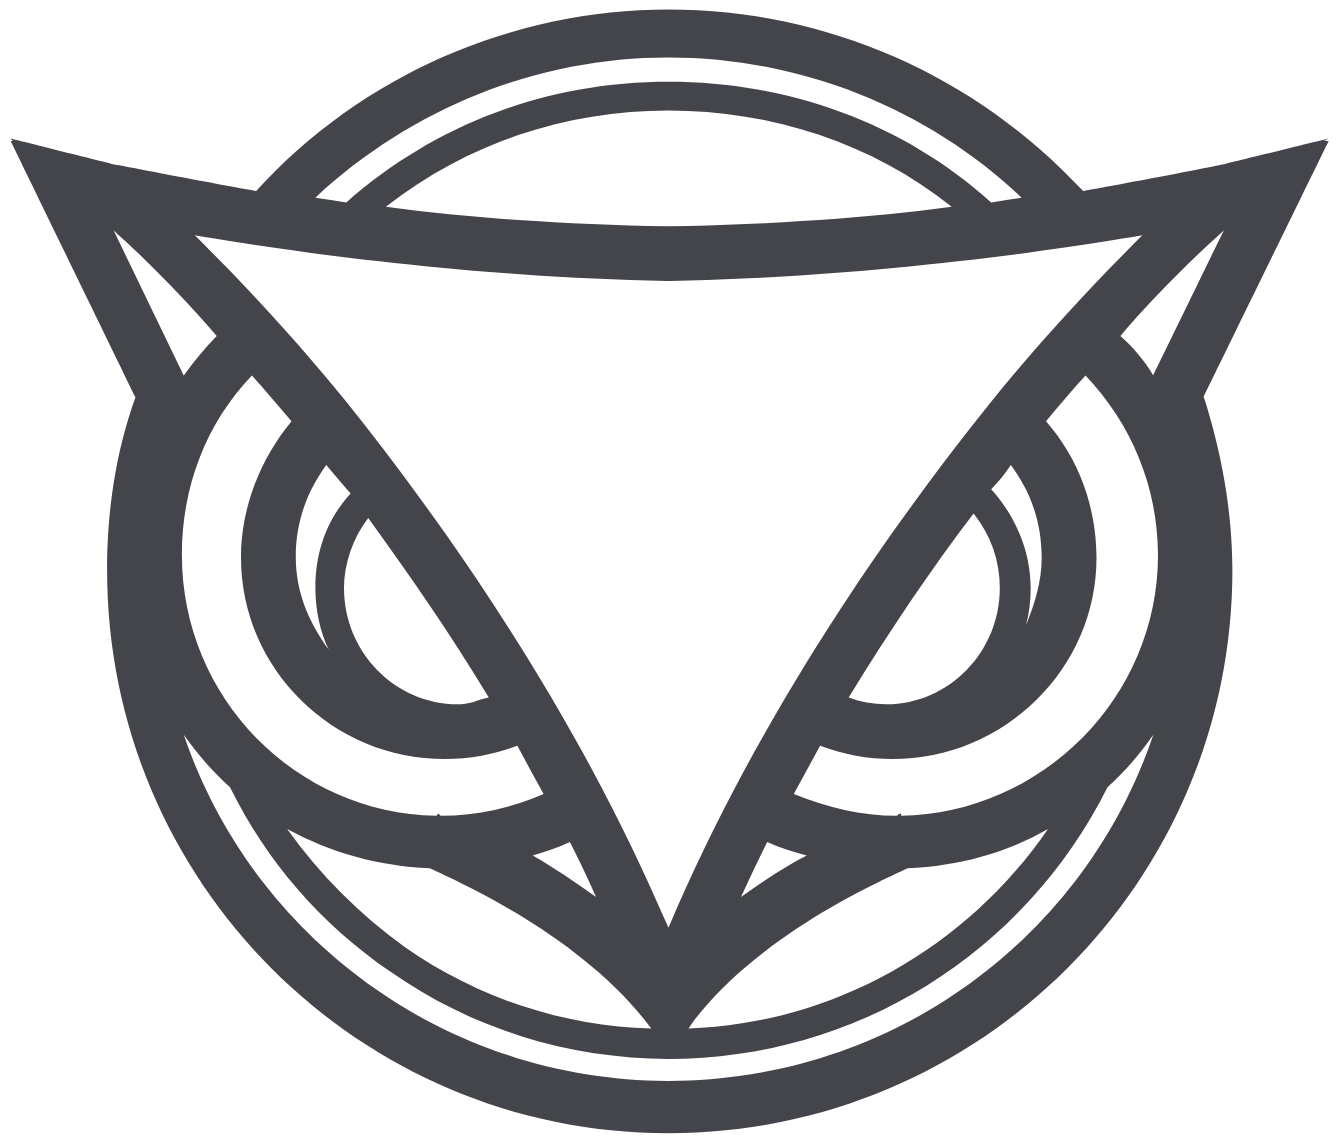 Cybereason logo in transparent PNG and vectorized SVG formats